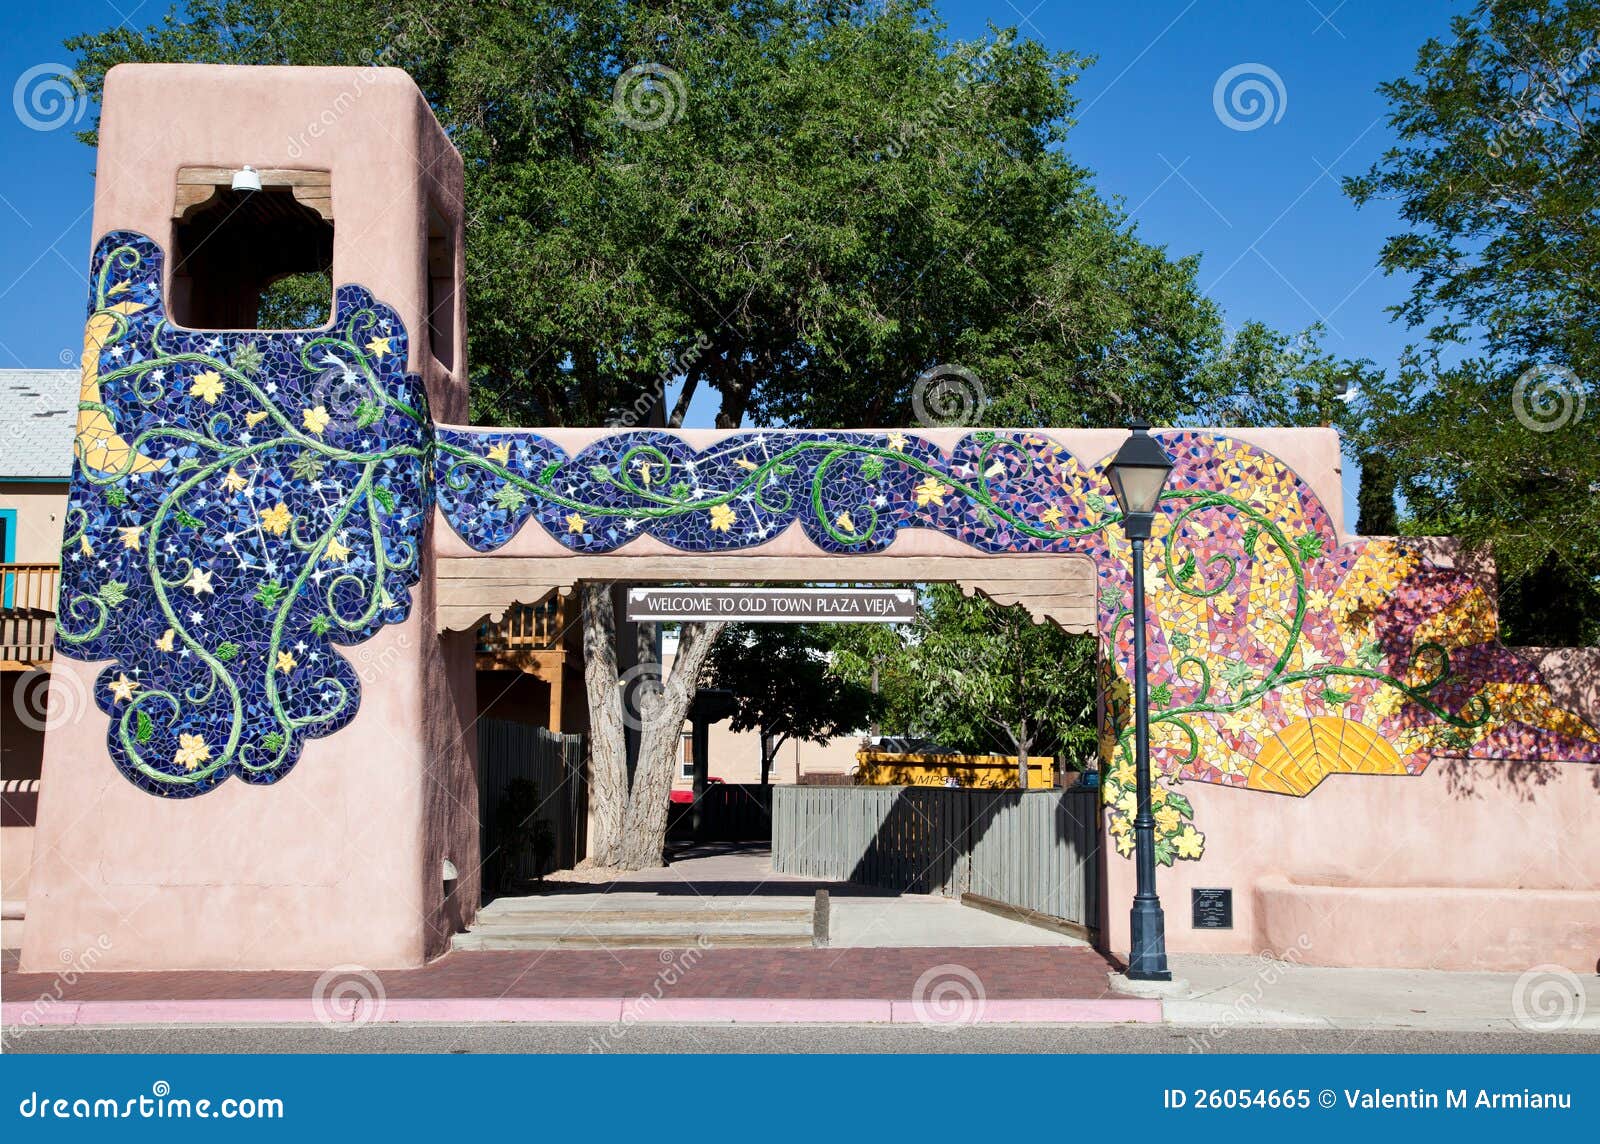 old town gate in albuquerque